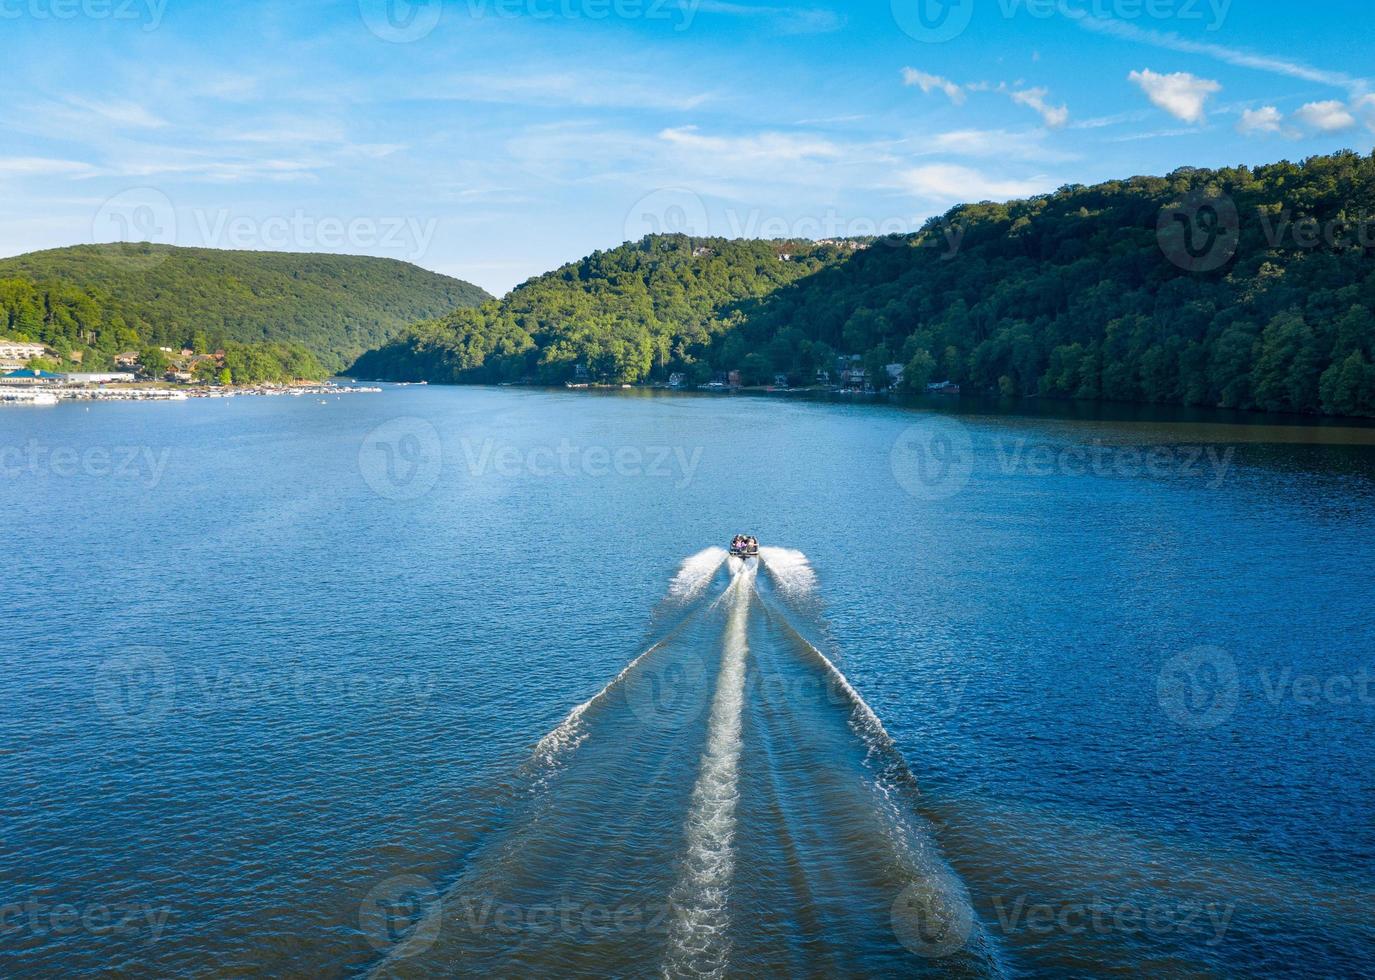 Speedboat on Cheat Lake on a summer evening with boats docked in marina photo